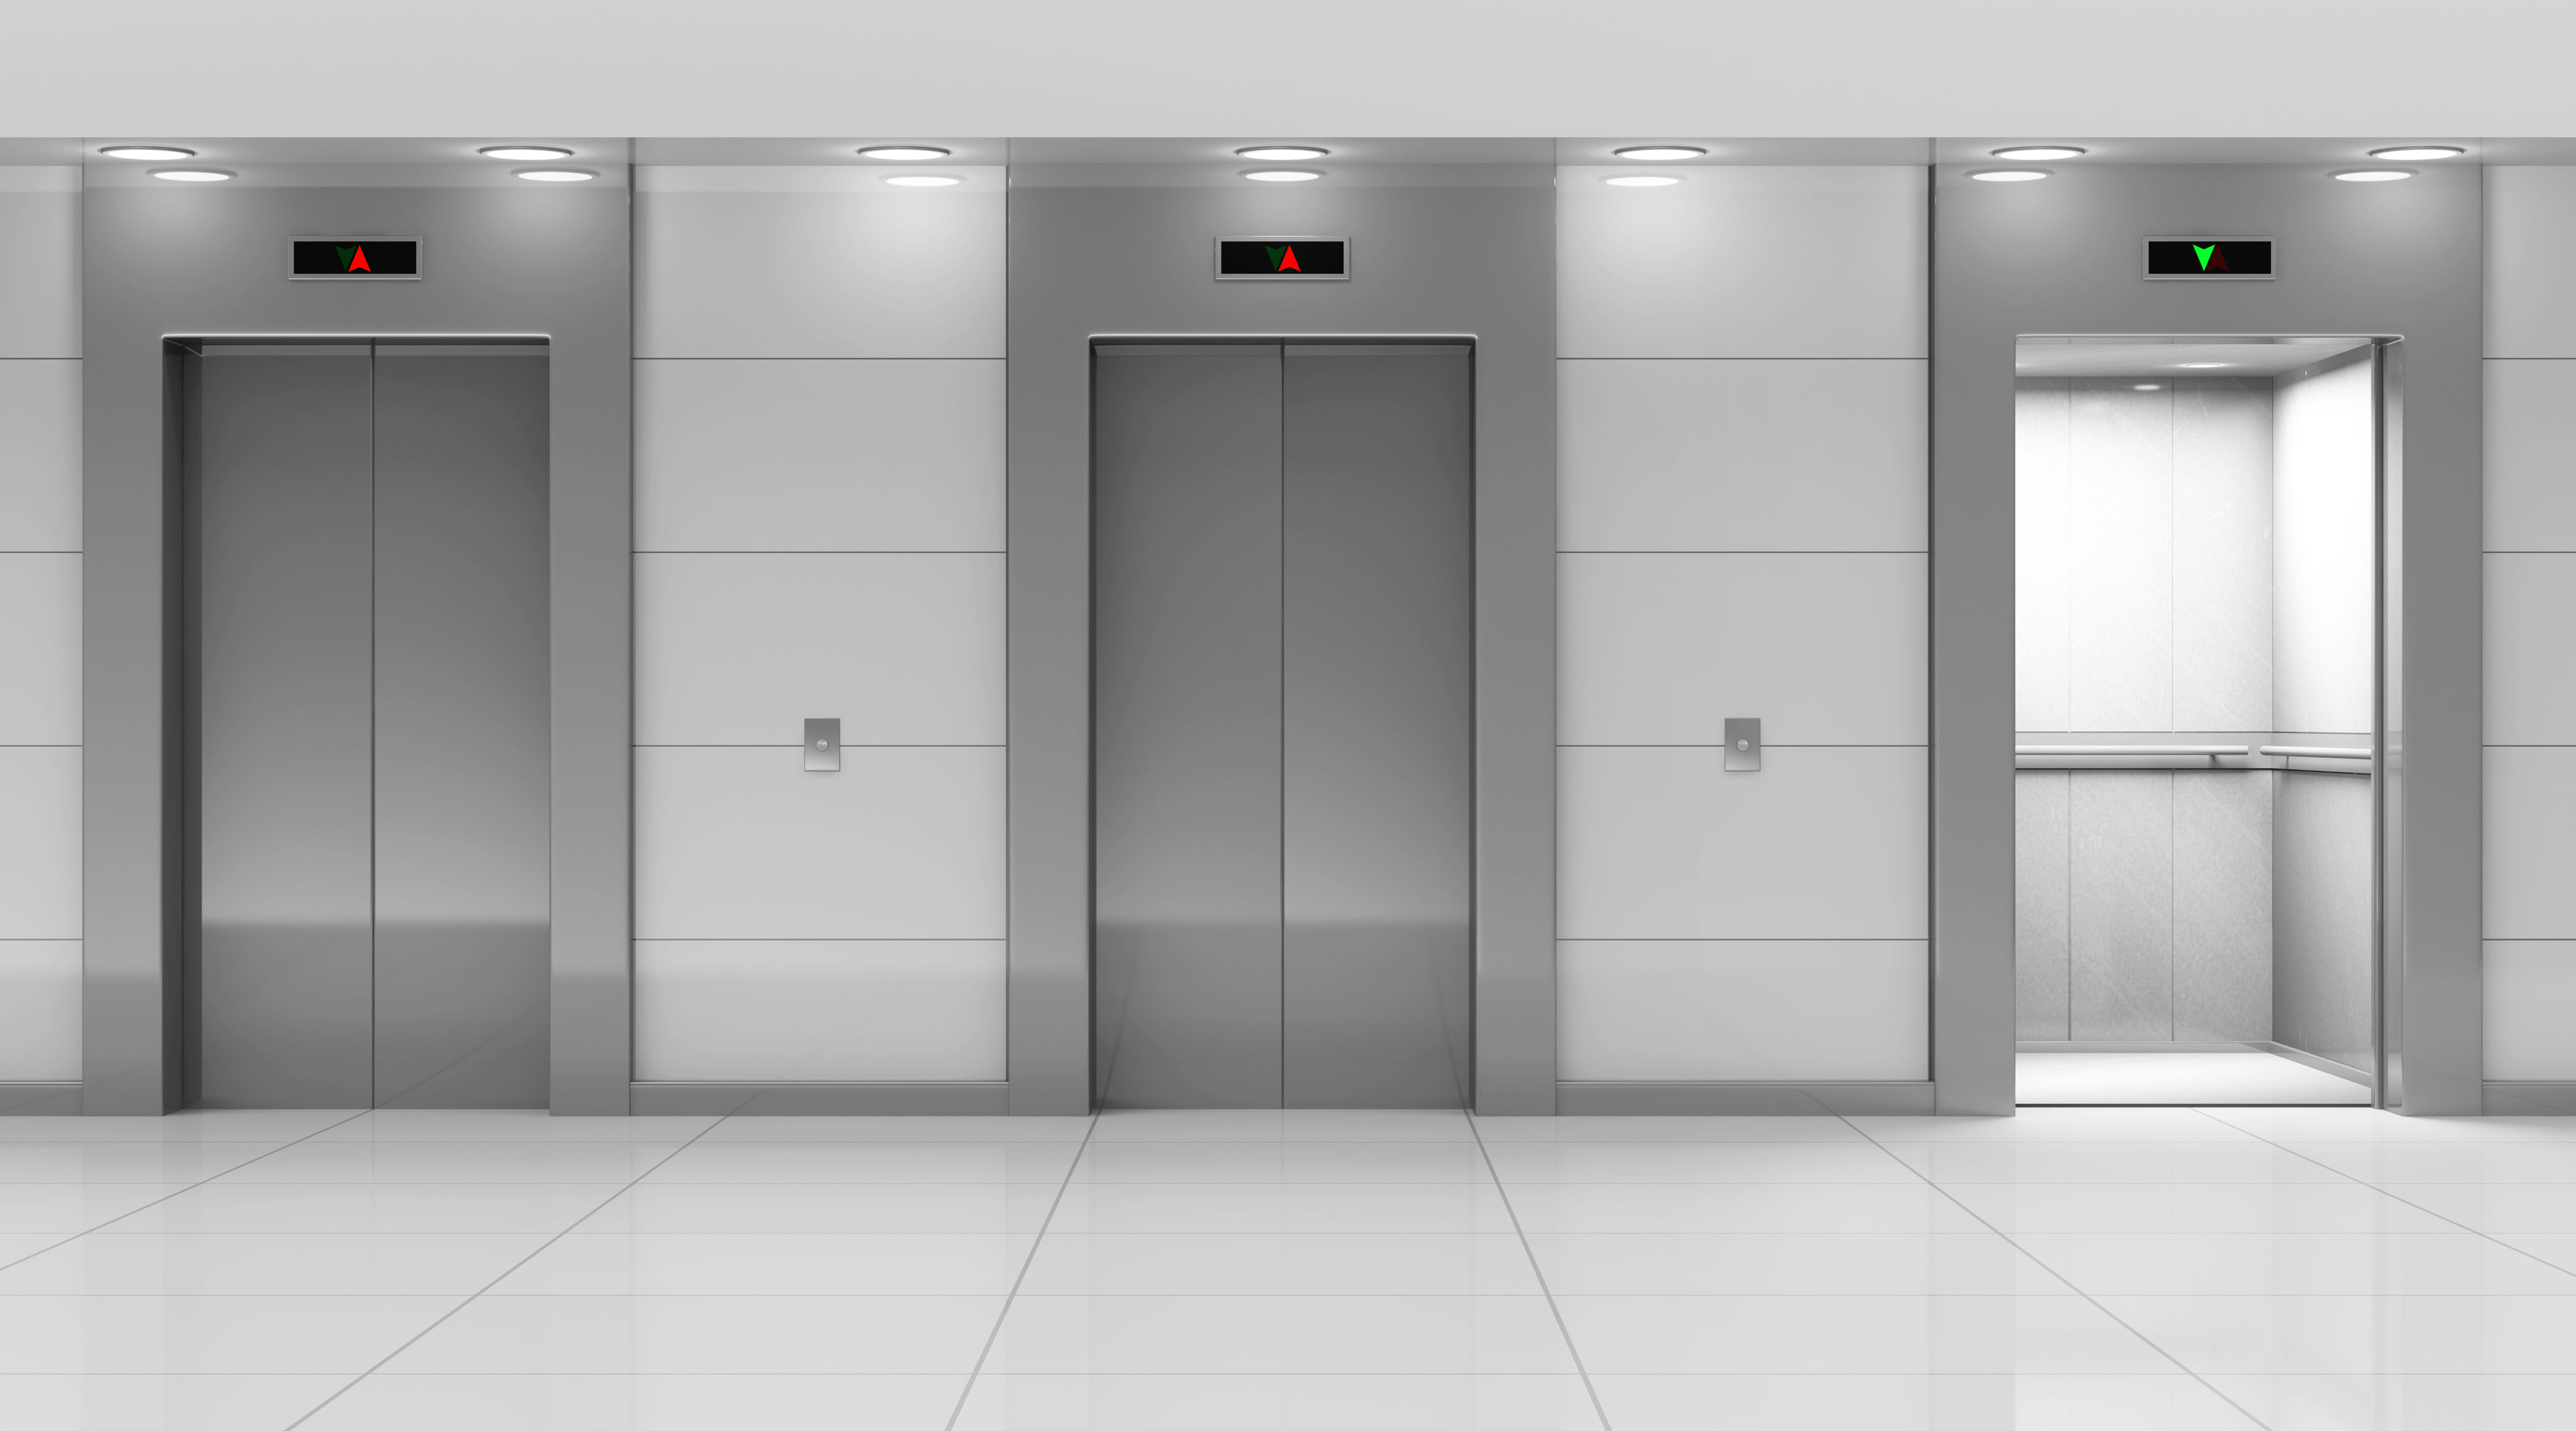 6 Causes of Elevator Injuries in New York